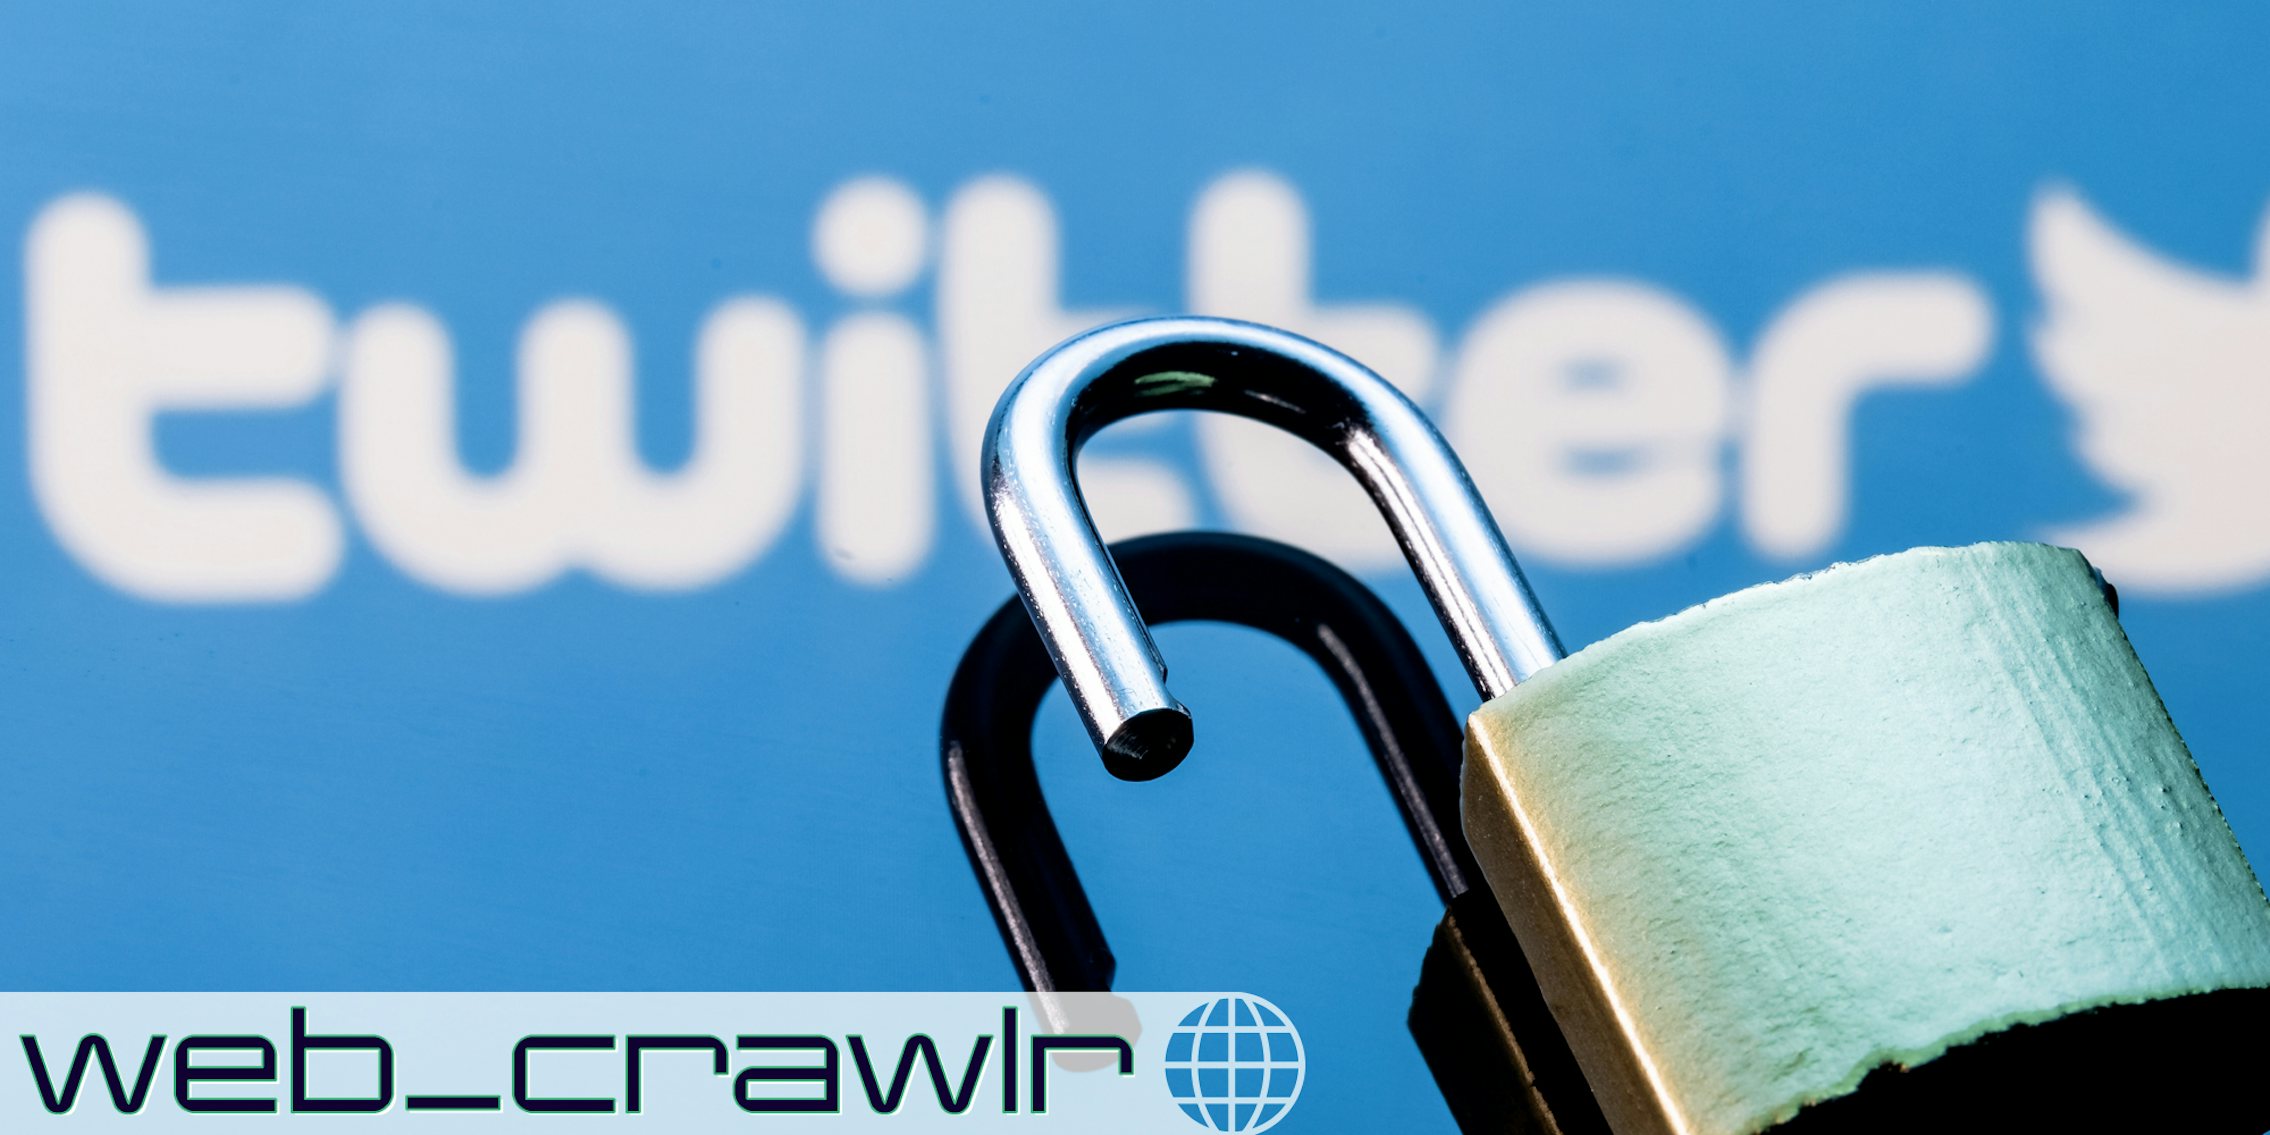 An open lock with the Twitter logo behind it. The Daily Dot newsletter web_crawlr logo is in the bottom left corner.